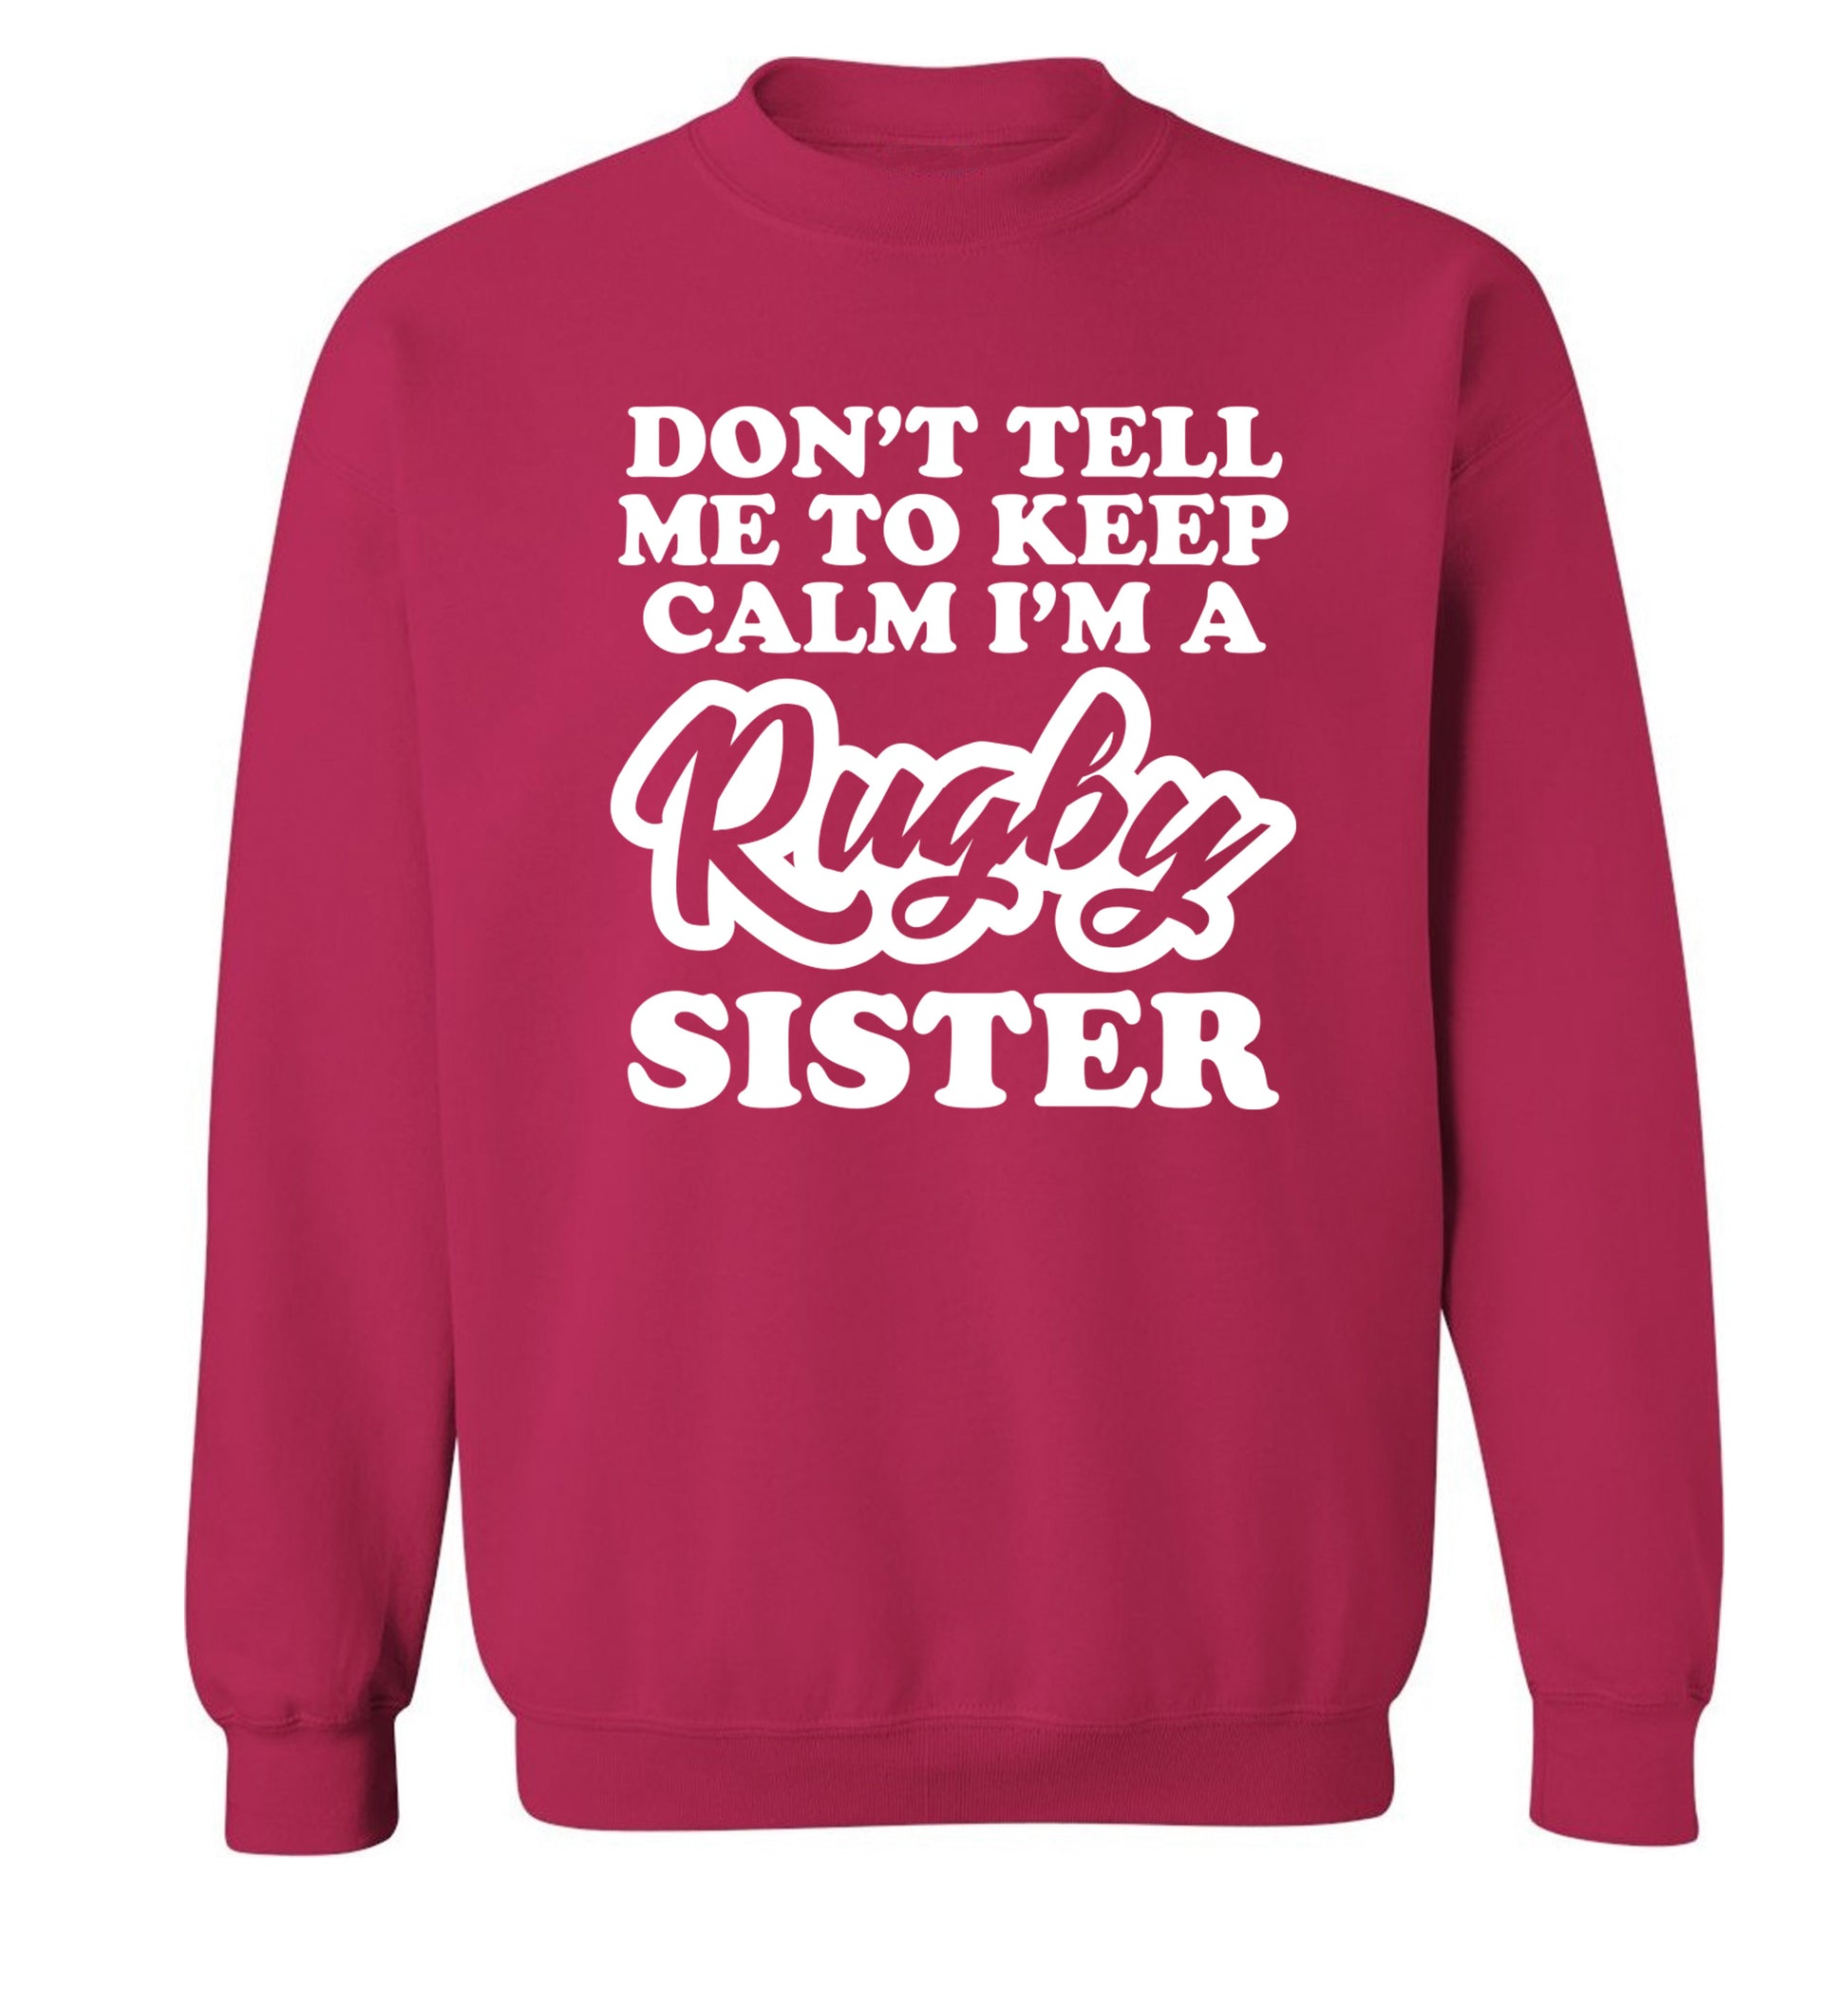 Don't tell me keep calm I'm a rugby sister Adult's unisex pink Sweater 2XL